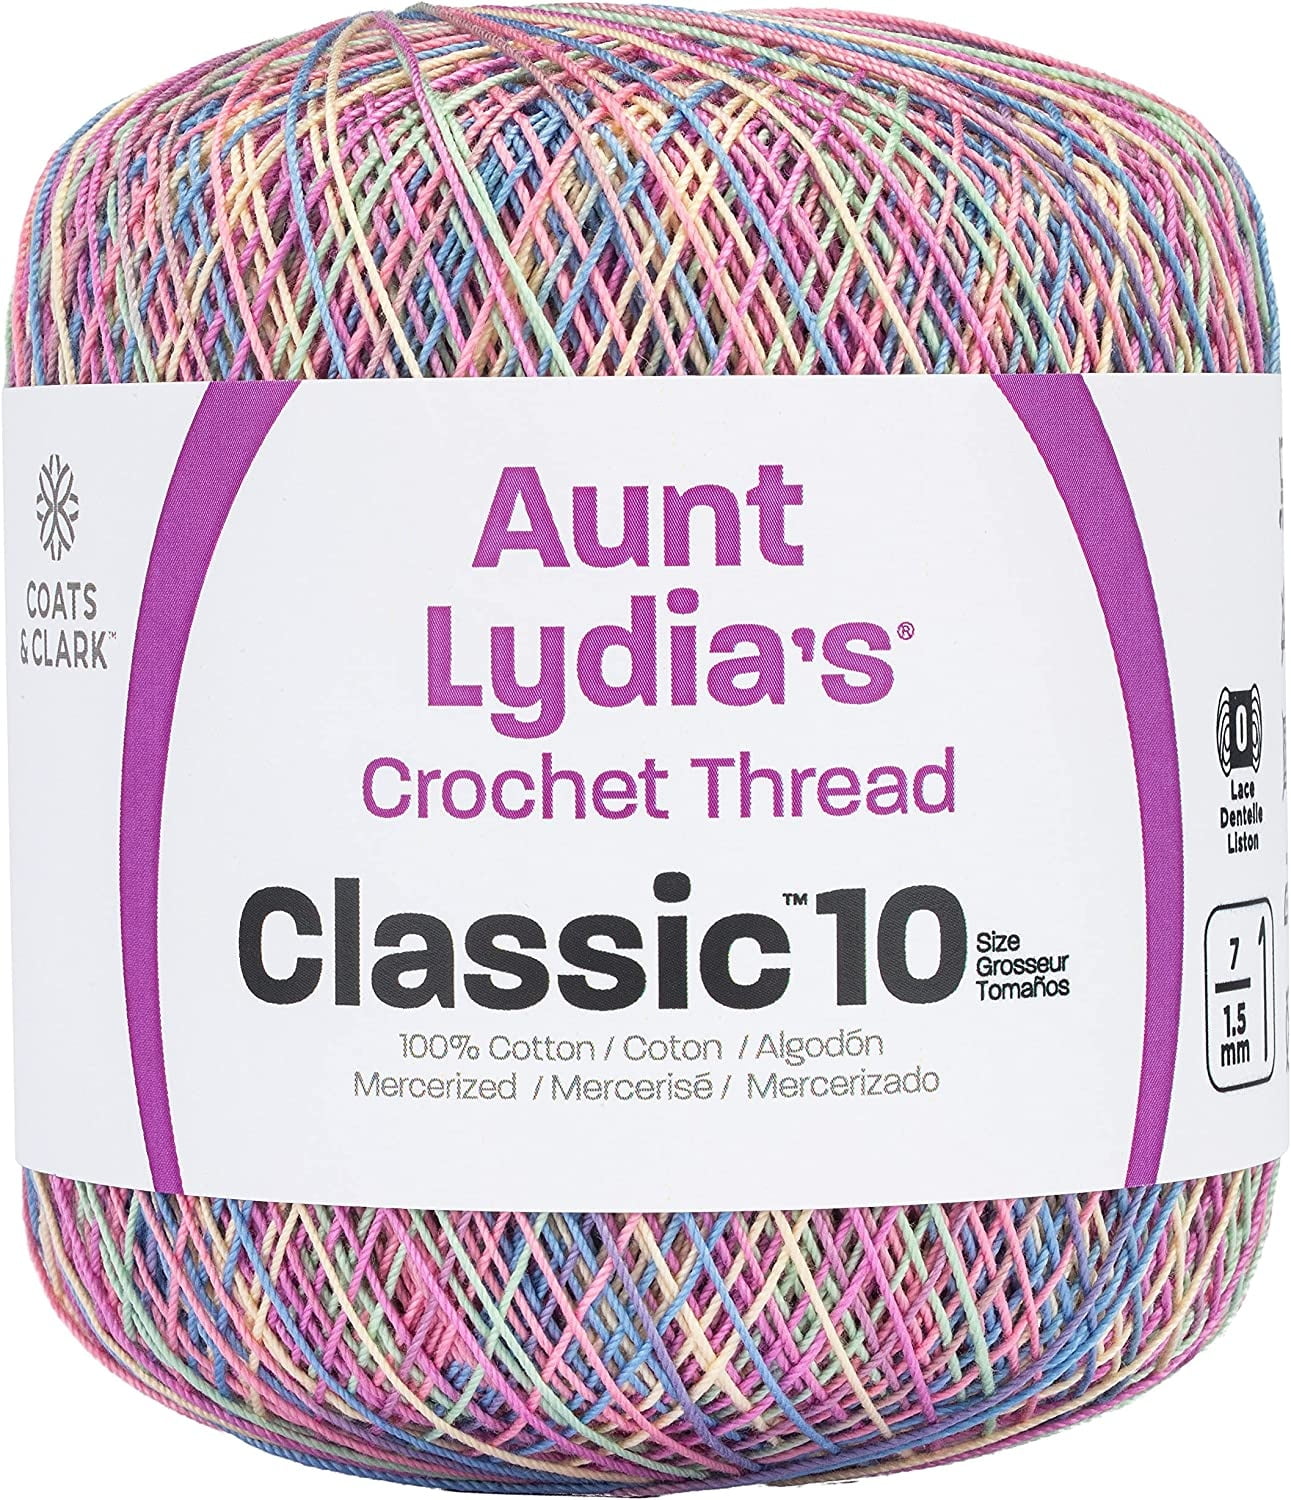 Aunt Lydia's Crochet Thread - Size 10 - Cardinal Red (2-Pack)